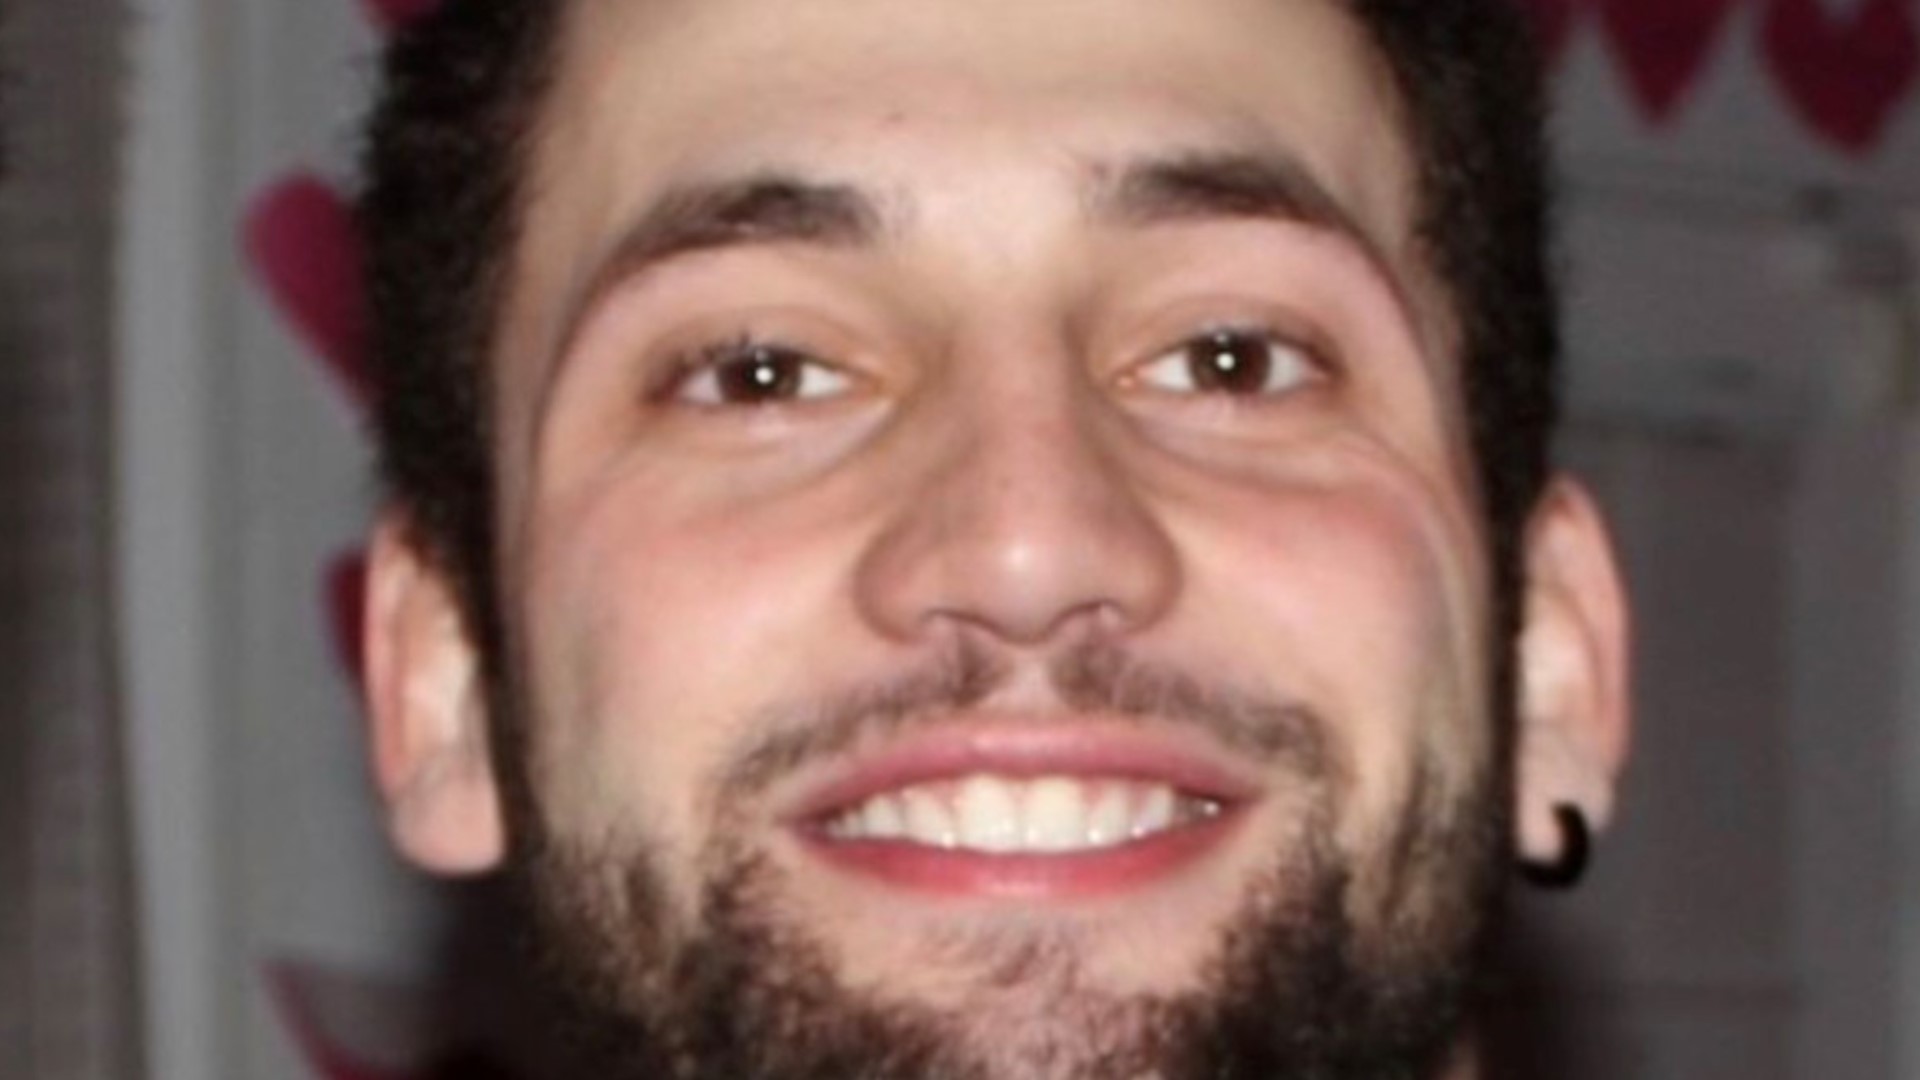 Chase Meola, 23, was shot and killed in the early morning hours of Oct. 11, 2020, as a party was ending outside of the fraternity's house on 14th Avenue.